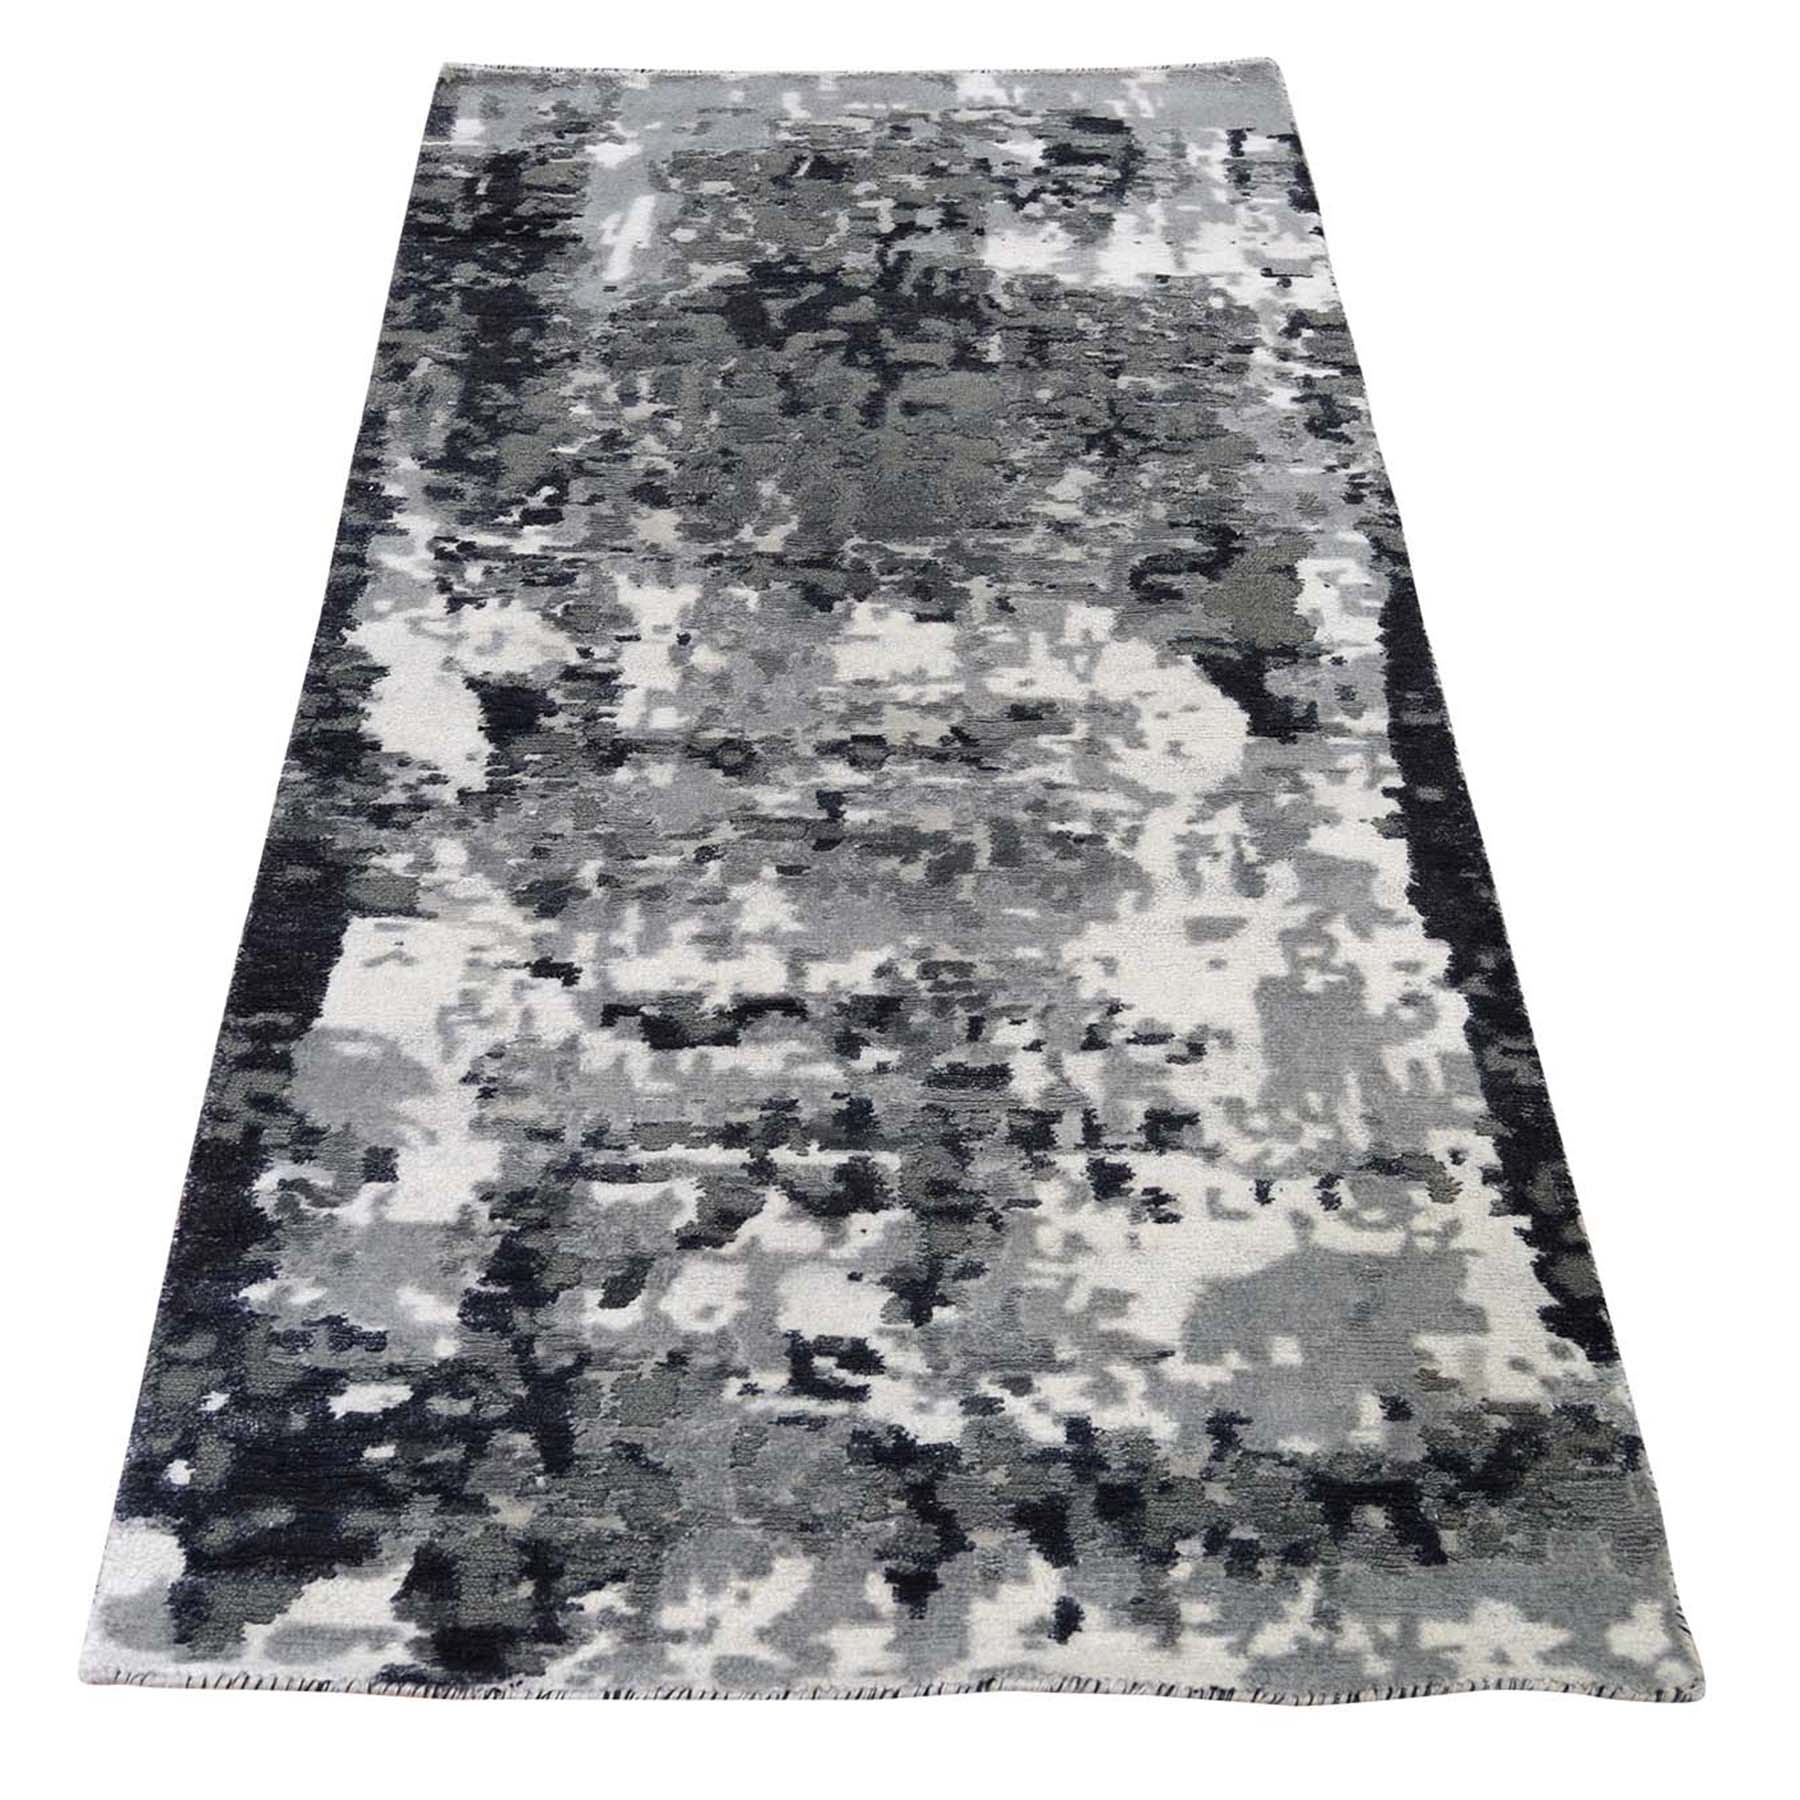 2-7 x5-9  Hi-Low Pile Abstract Design Wool And Silk Runner Hand-Knotted Oriental Rug 